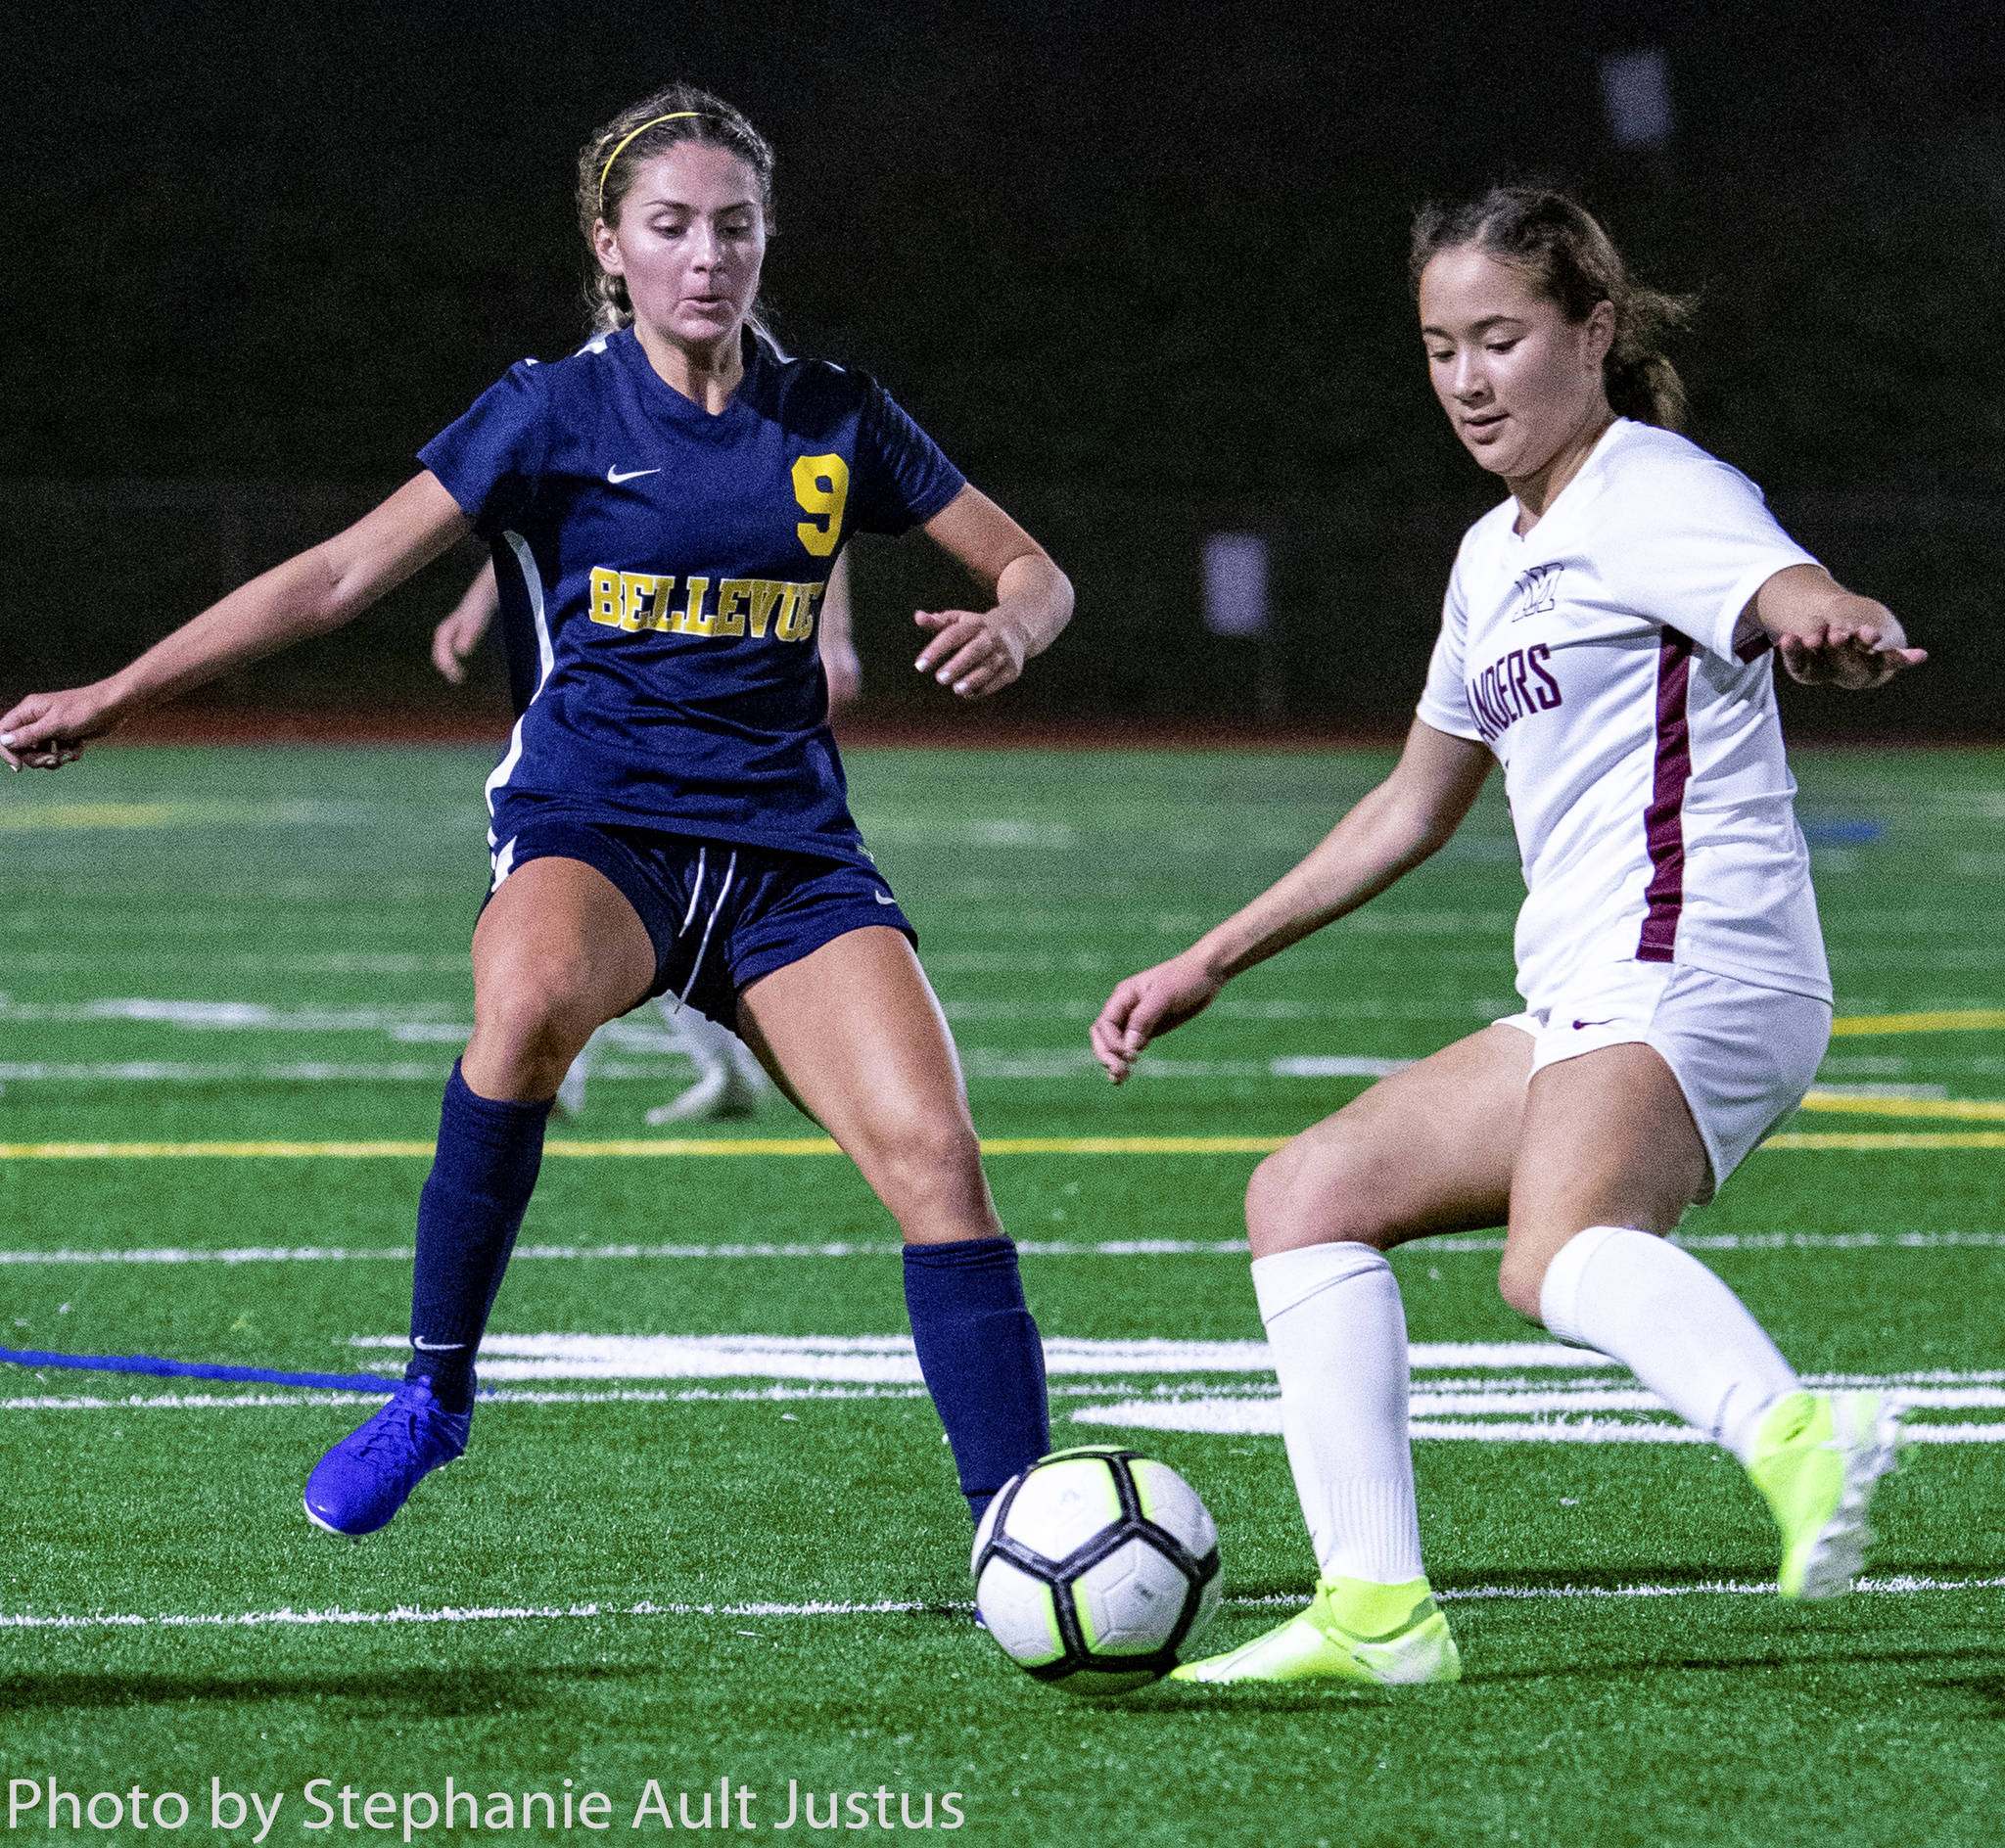 Mercer Island midfielder Emily Yang (right) was named to the first-team all-league 3A KingCo team. Yang, a junior, is one of the captains for the Islanders and a key piece in the midfield. Photo courtesy of Stephanie Ault Justus